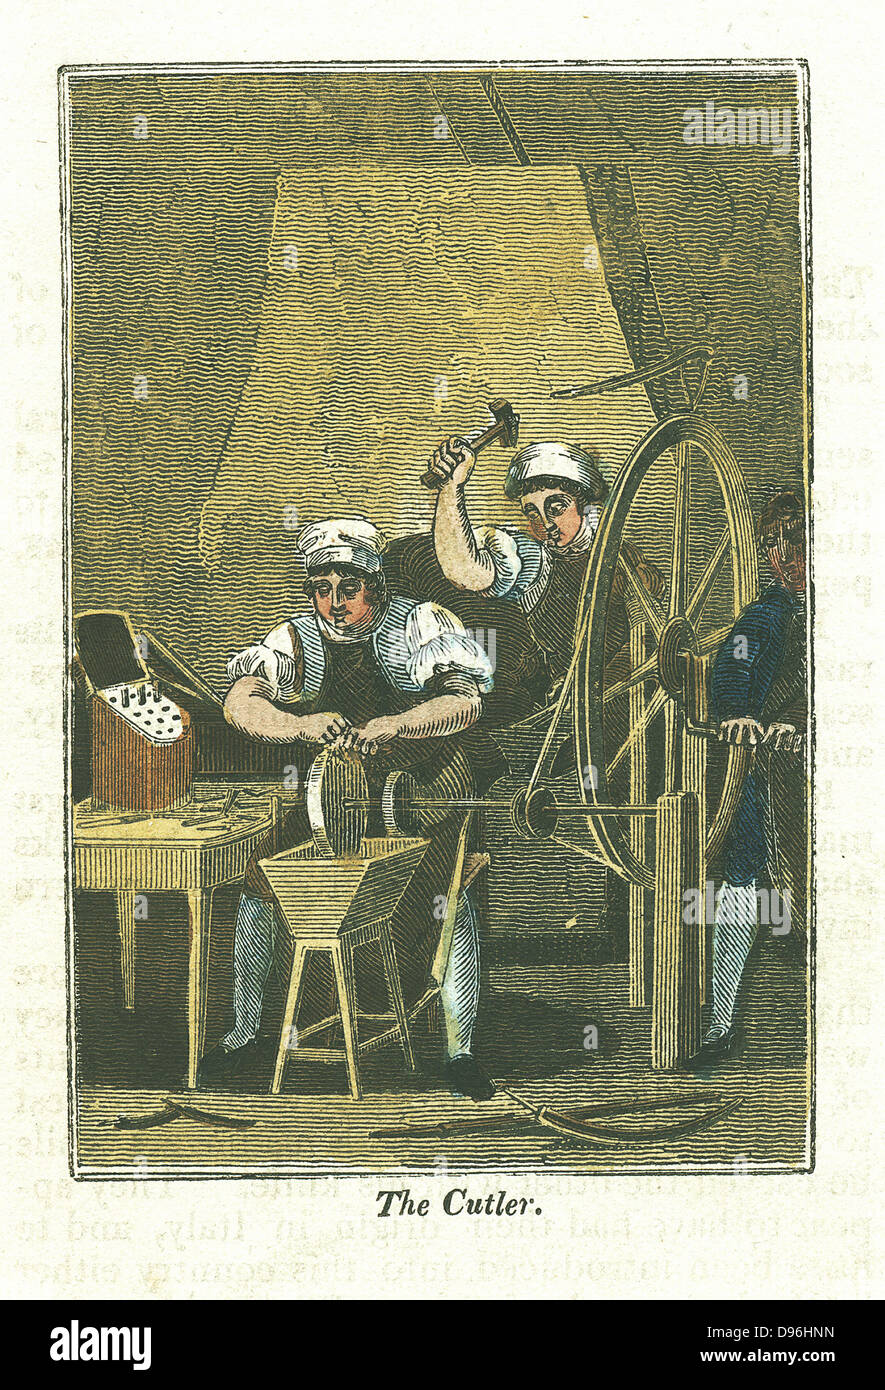 The Cutler. Knife blades are shaped at forge in background and sharpened on grindstone turned by wheel operated by boy on right. Handles would be attached and finished knives would be presented in fitted wooden box on table at left.  Hand-coloured woodcut Stock Photo